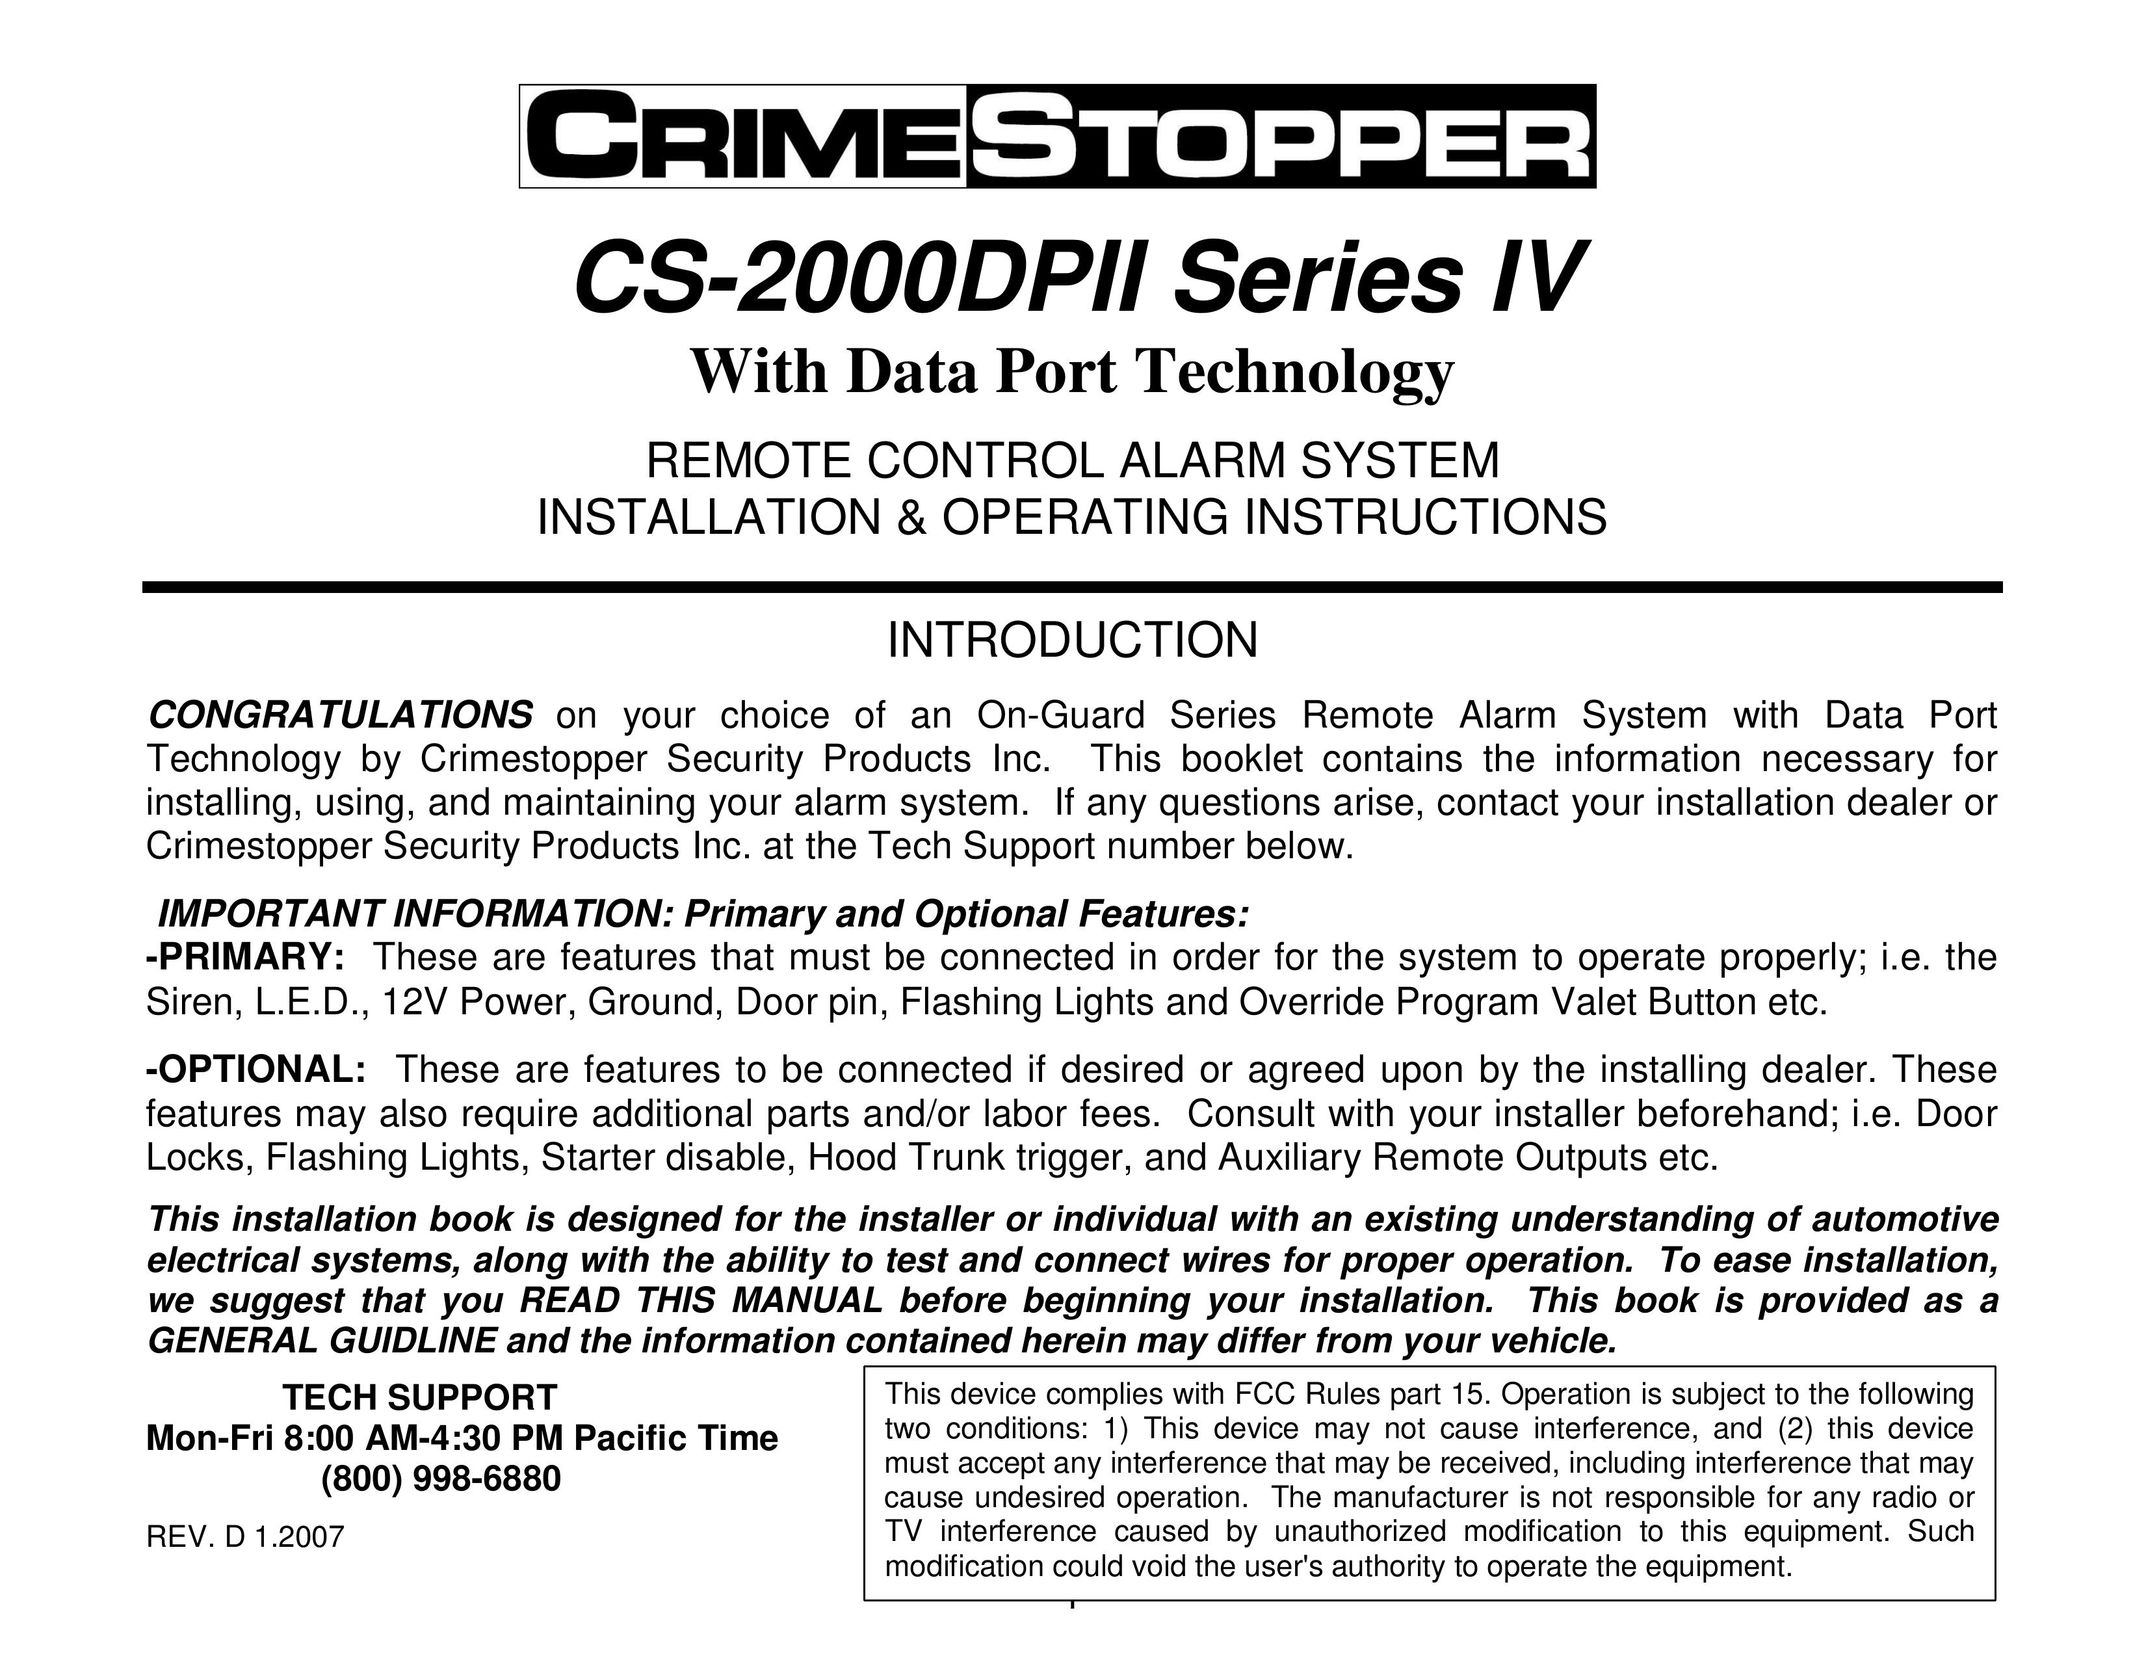 Crimestopper Security Products CS-2000DPII Home Security System User Manual